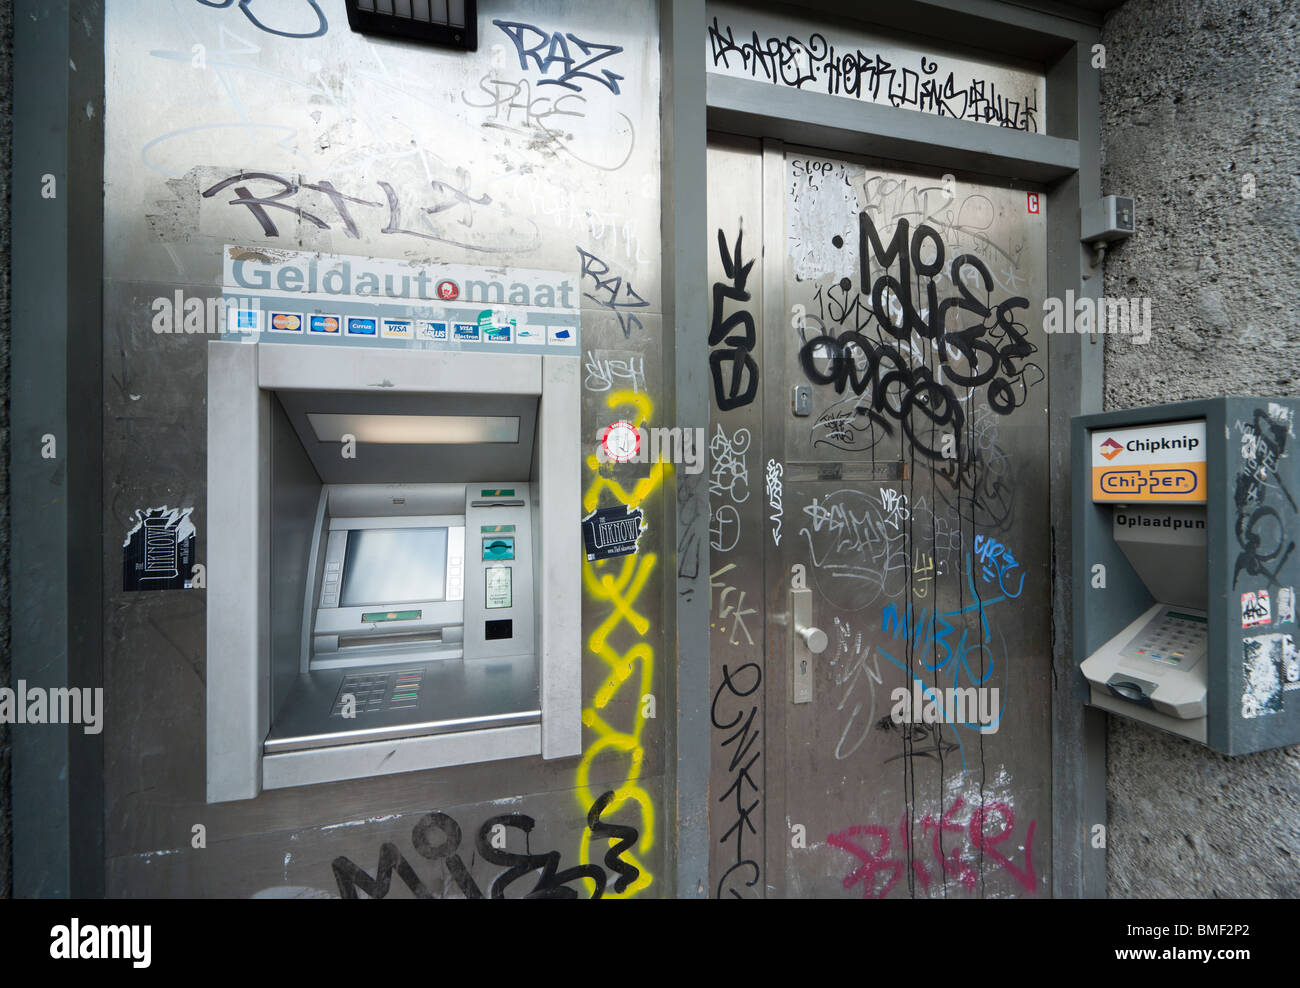 Amsterdam ATM, automatic teller money machine, cashpoint, cash point, in a dirty unclean unsafe corner with ugly graffiti tags. Stock Photo